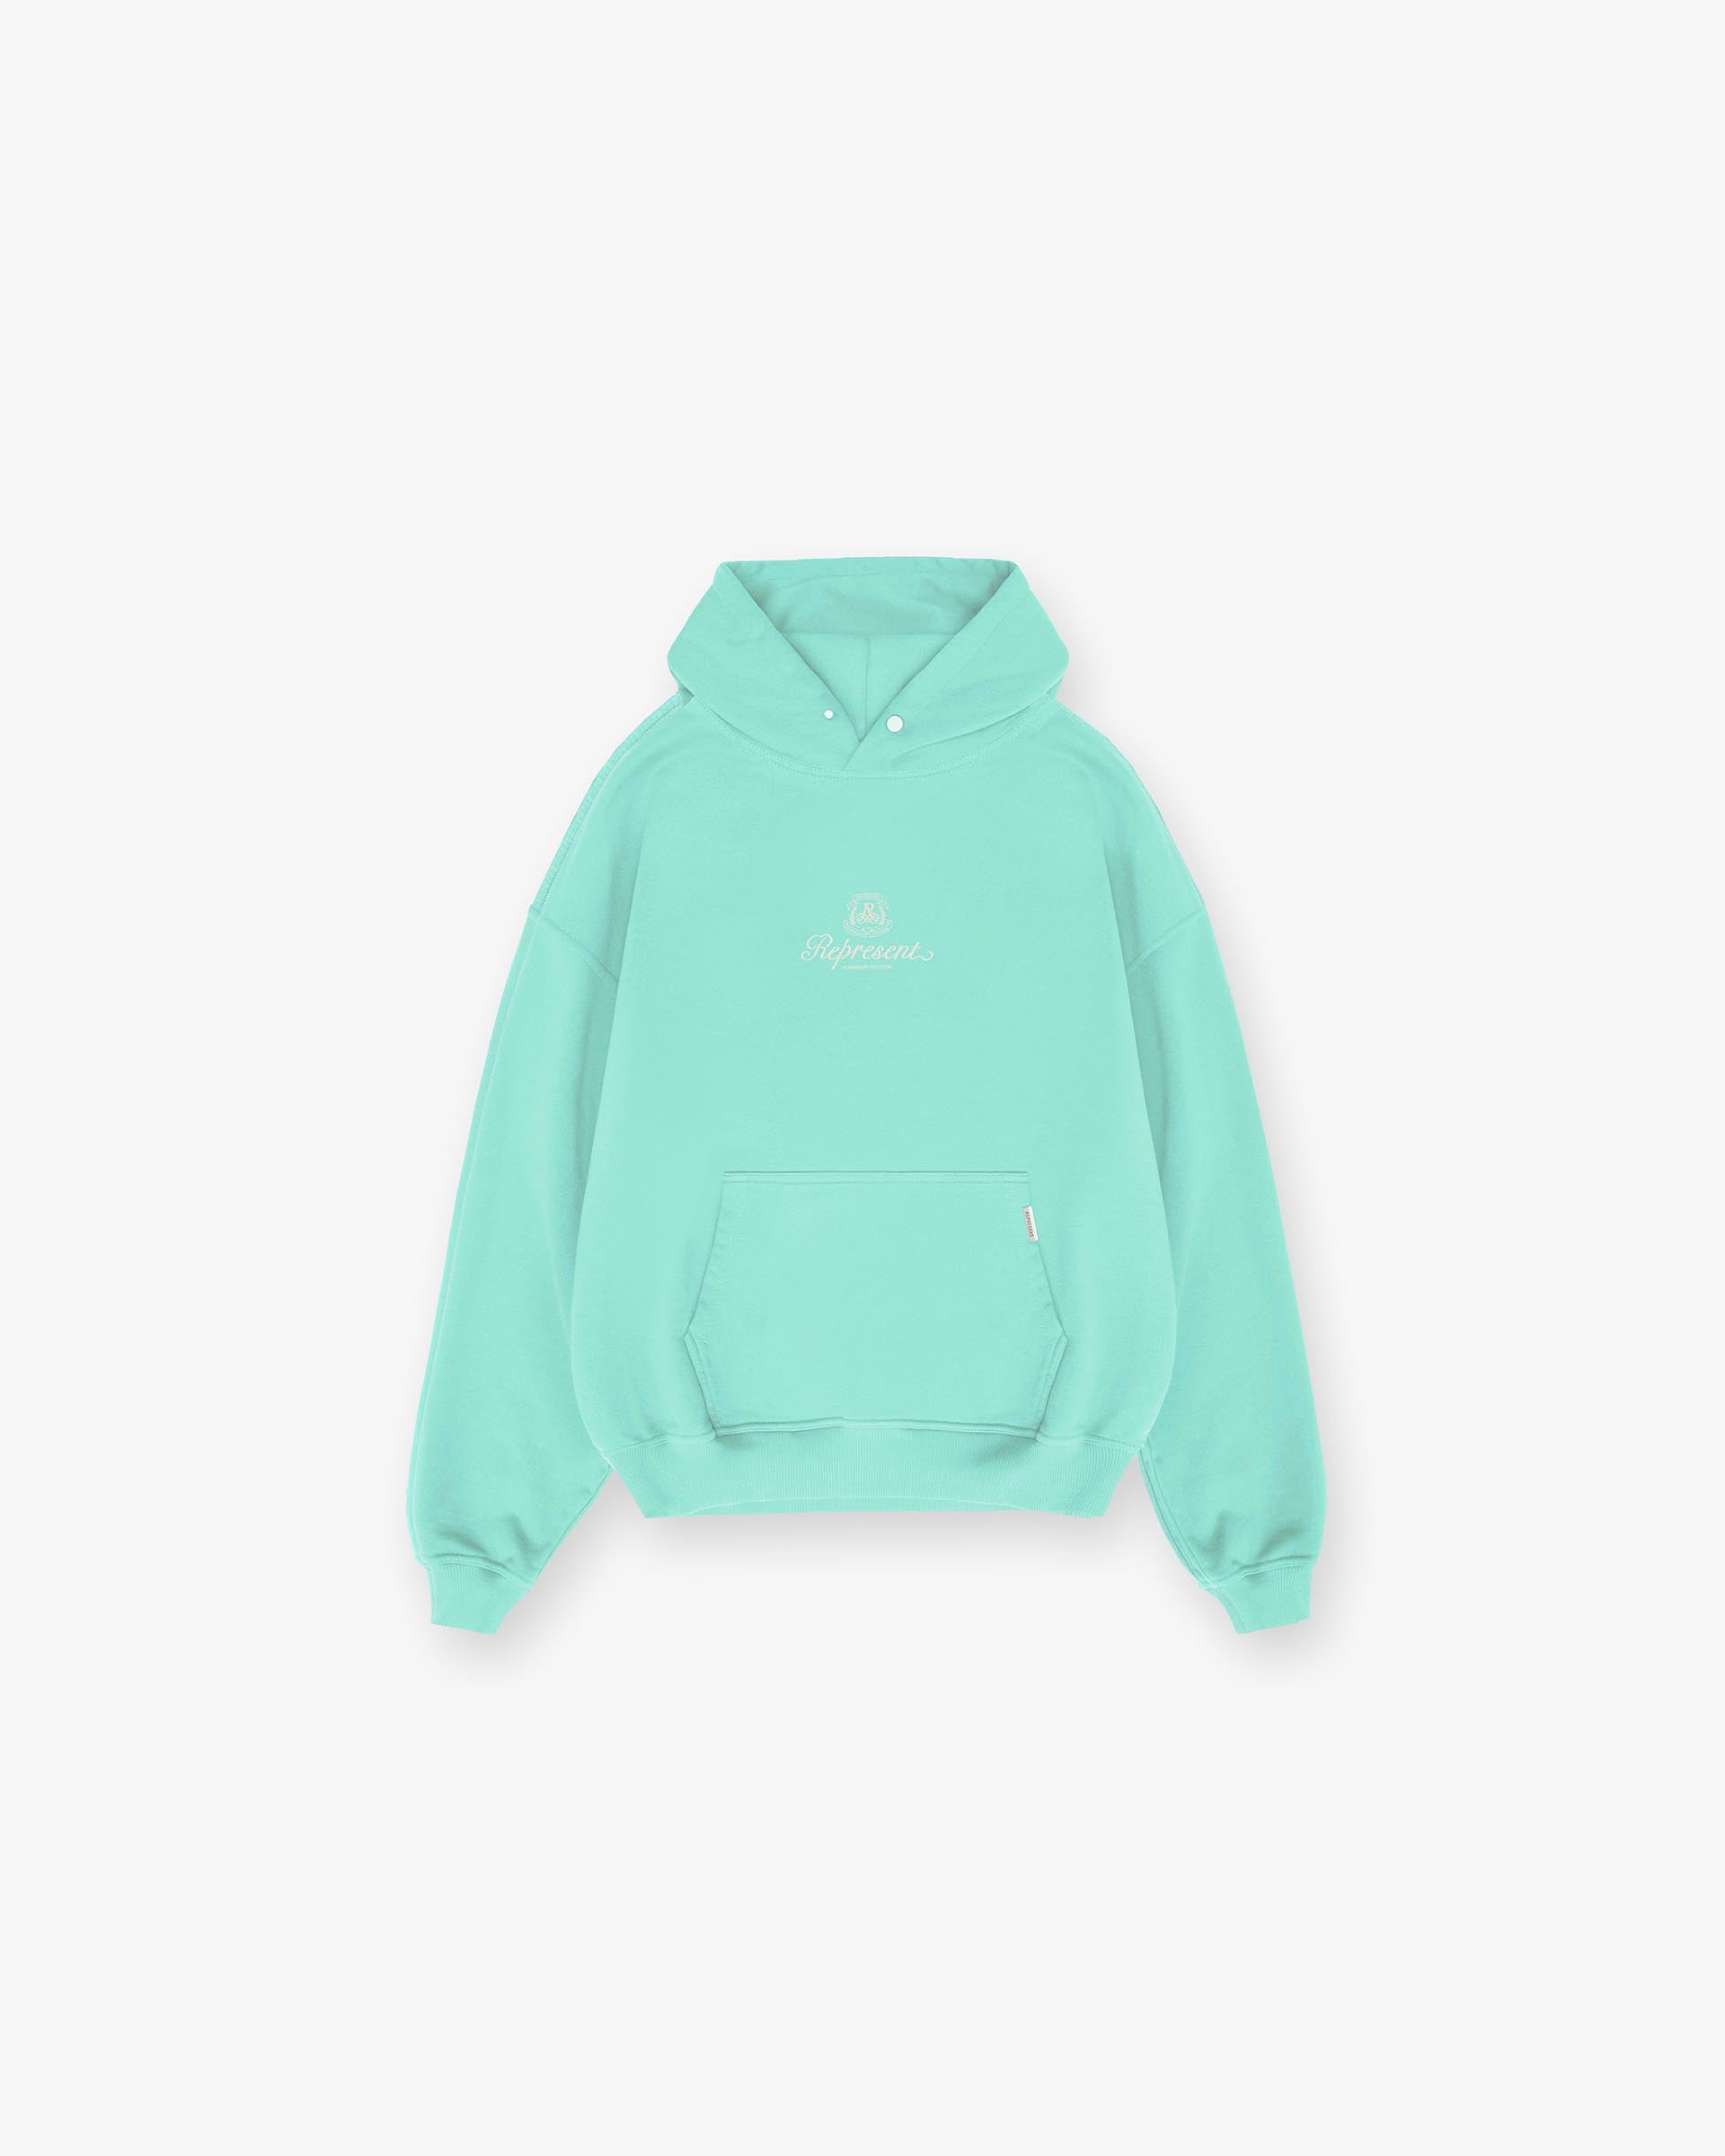 Permanent Vacation Hoodie - Electric Mint